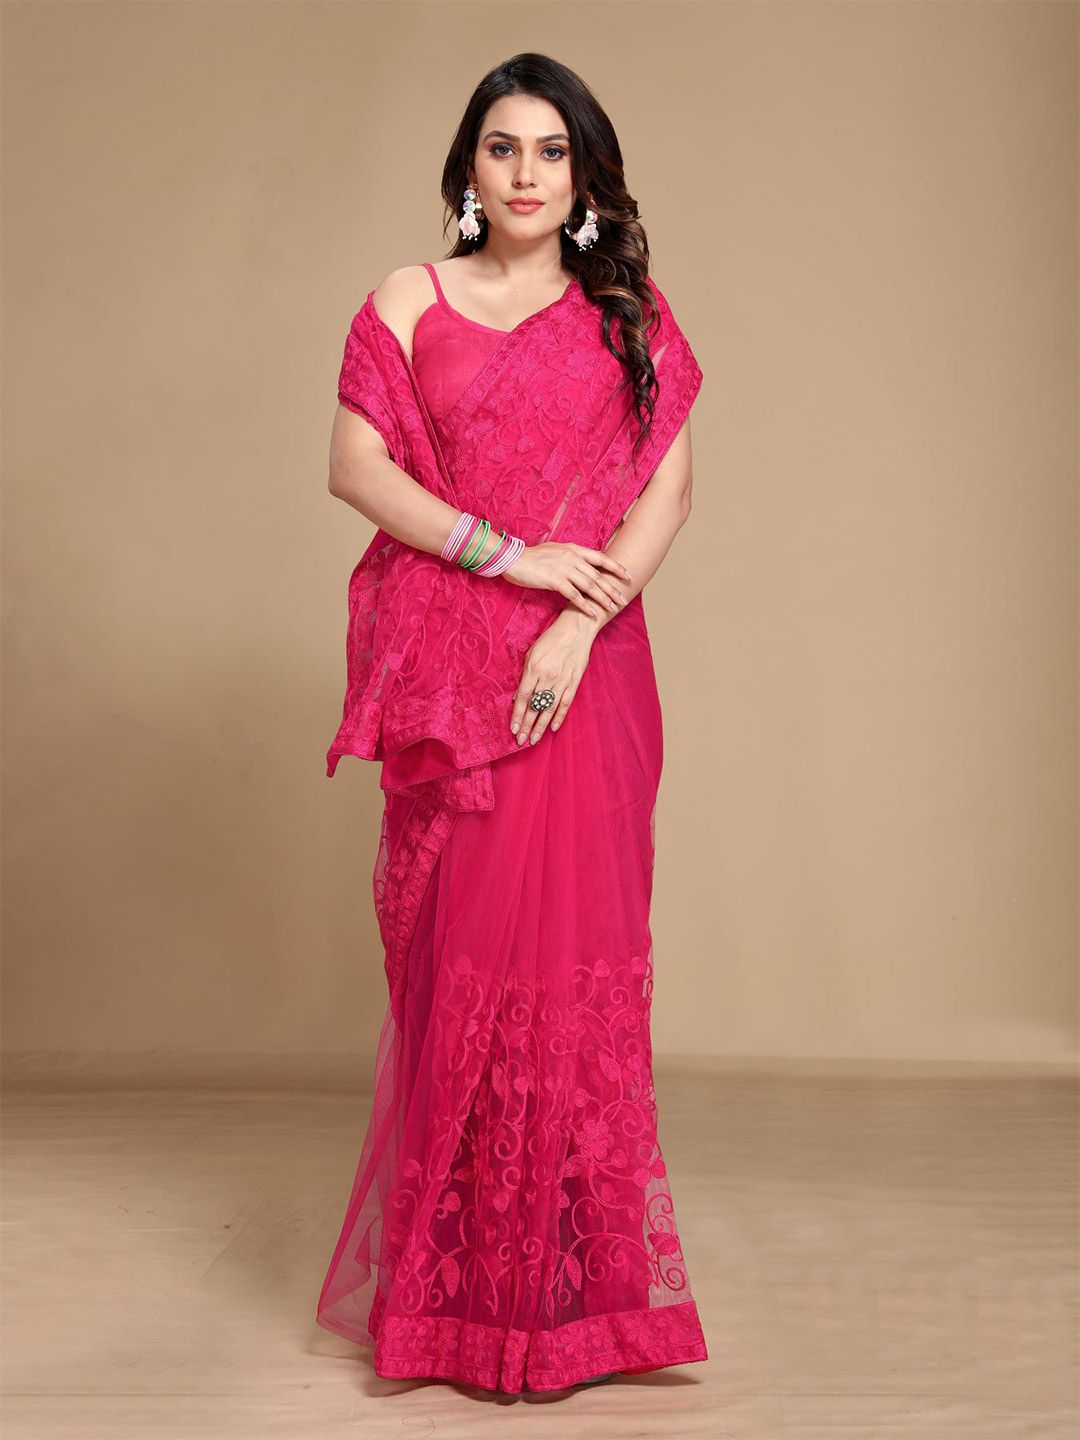 VAIRAGEE Pink Floral Embroidered Net Saree Price in India